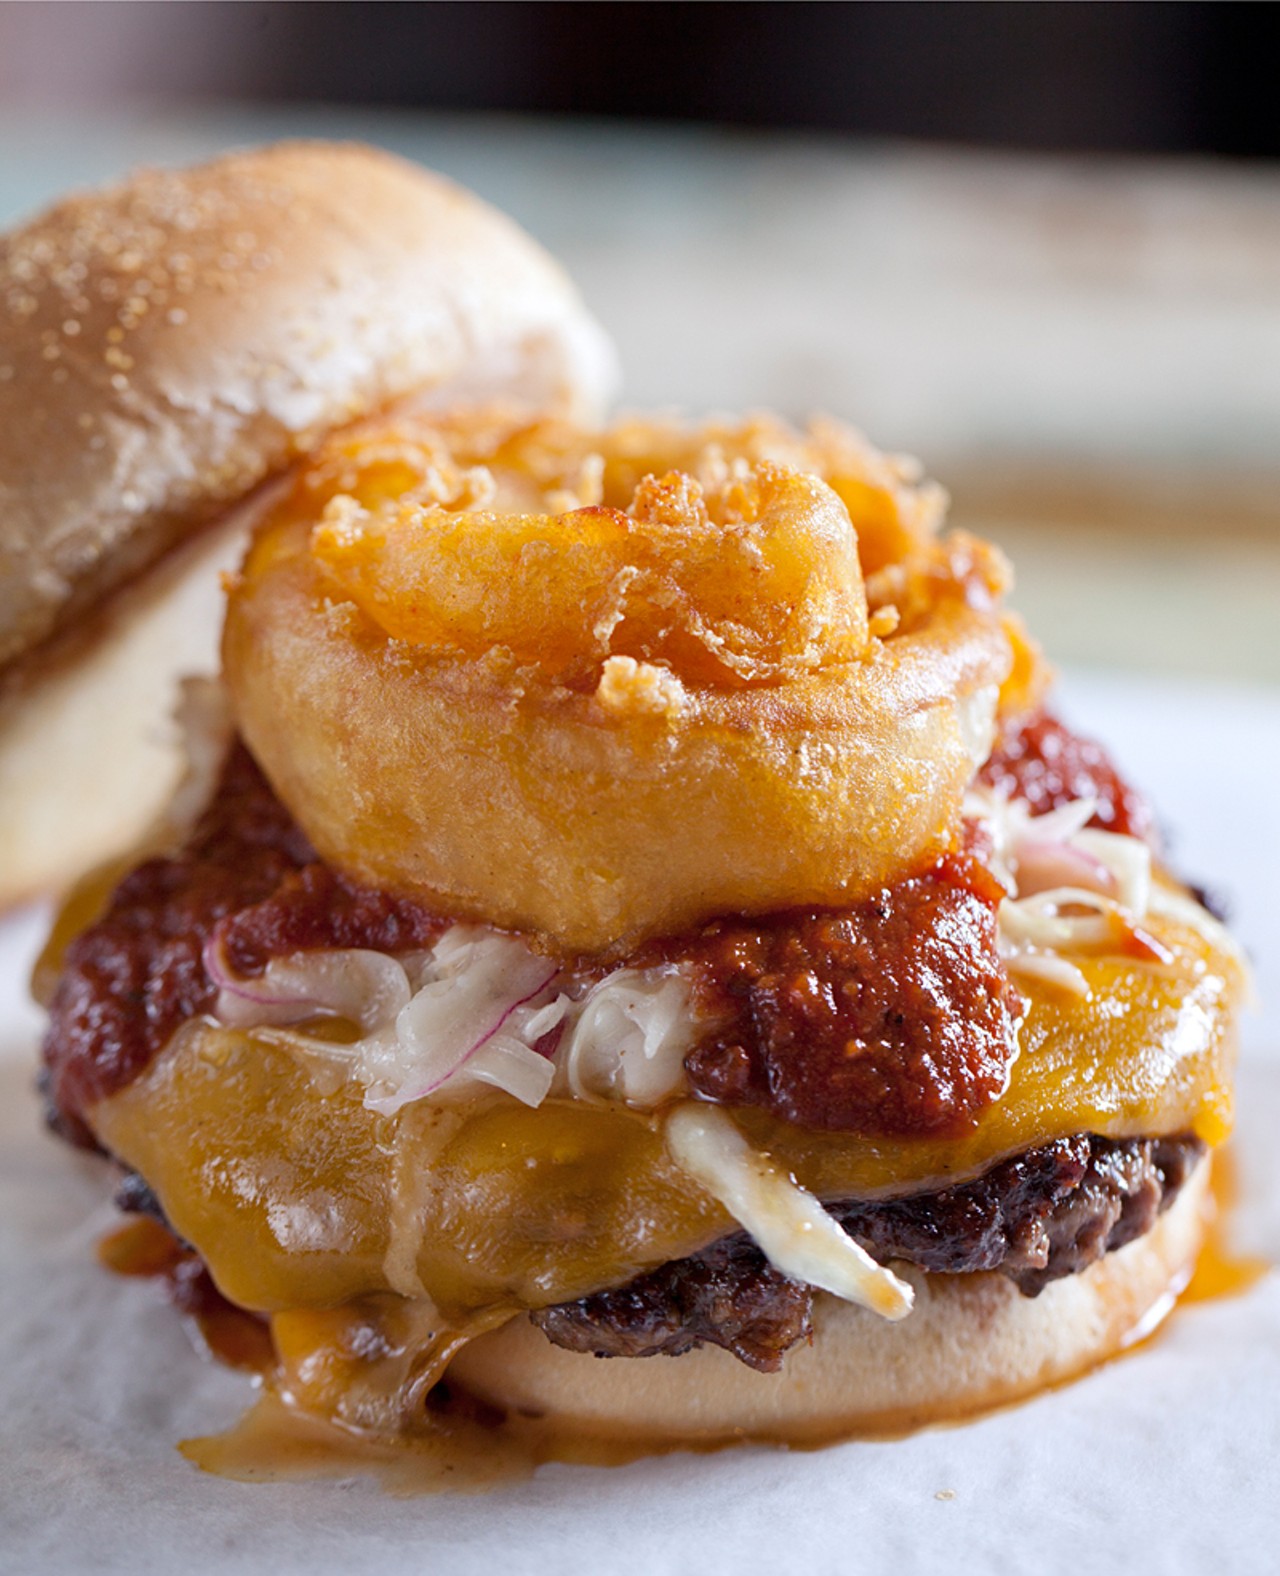 The "Smokehouse Smash Burger" is served with bbq, bacon jam, onion ring, carolina slaw and cheddar cheese.